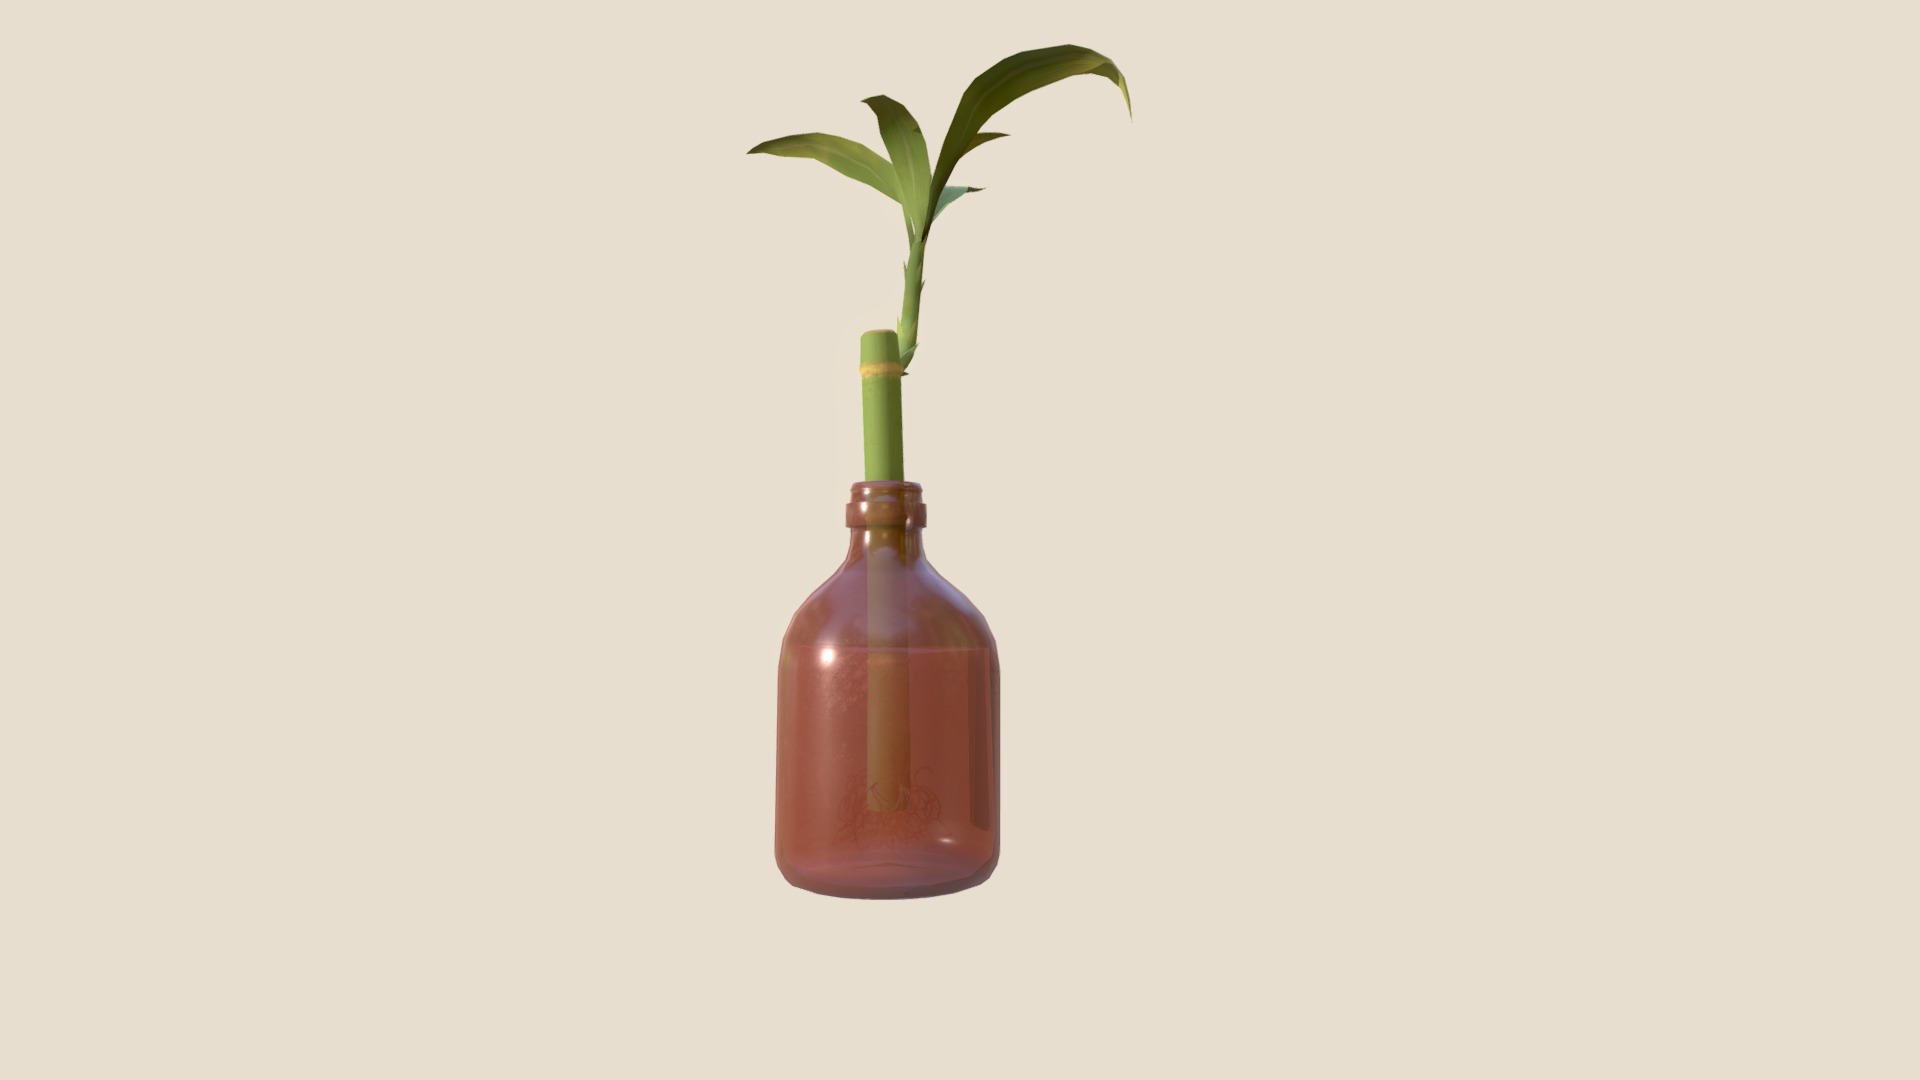 3D model Bamboo Houseplant - This is a 3D model of the Bamboo Houseplant. The 3D model is about a plant in a bottle.